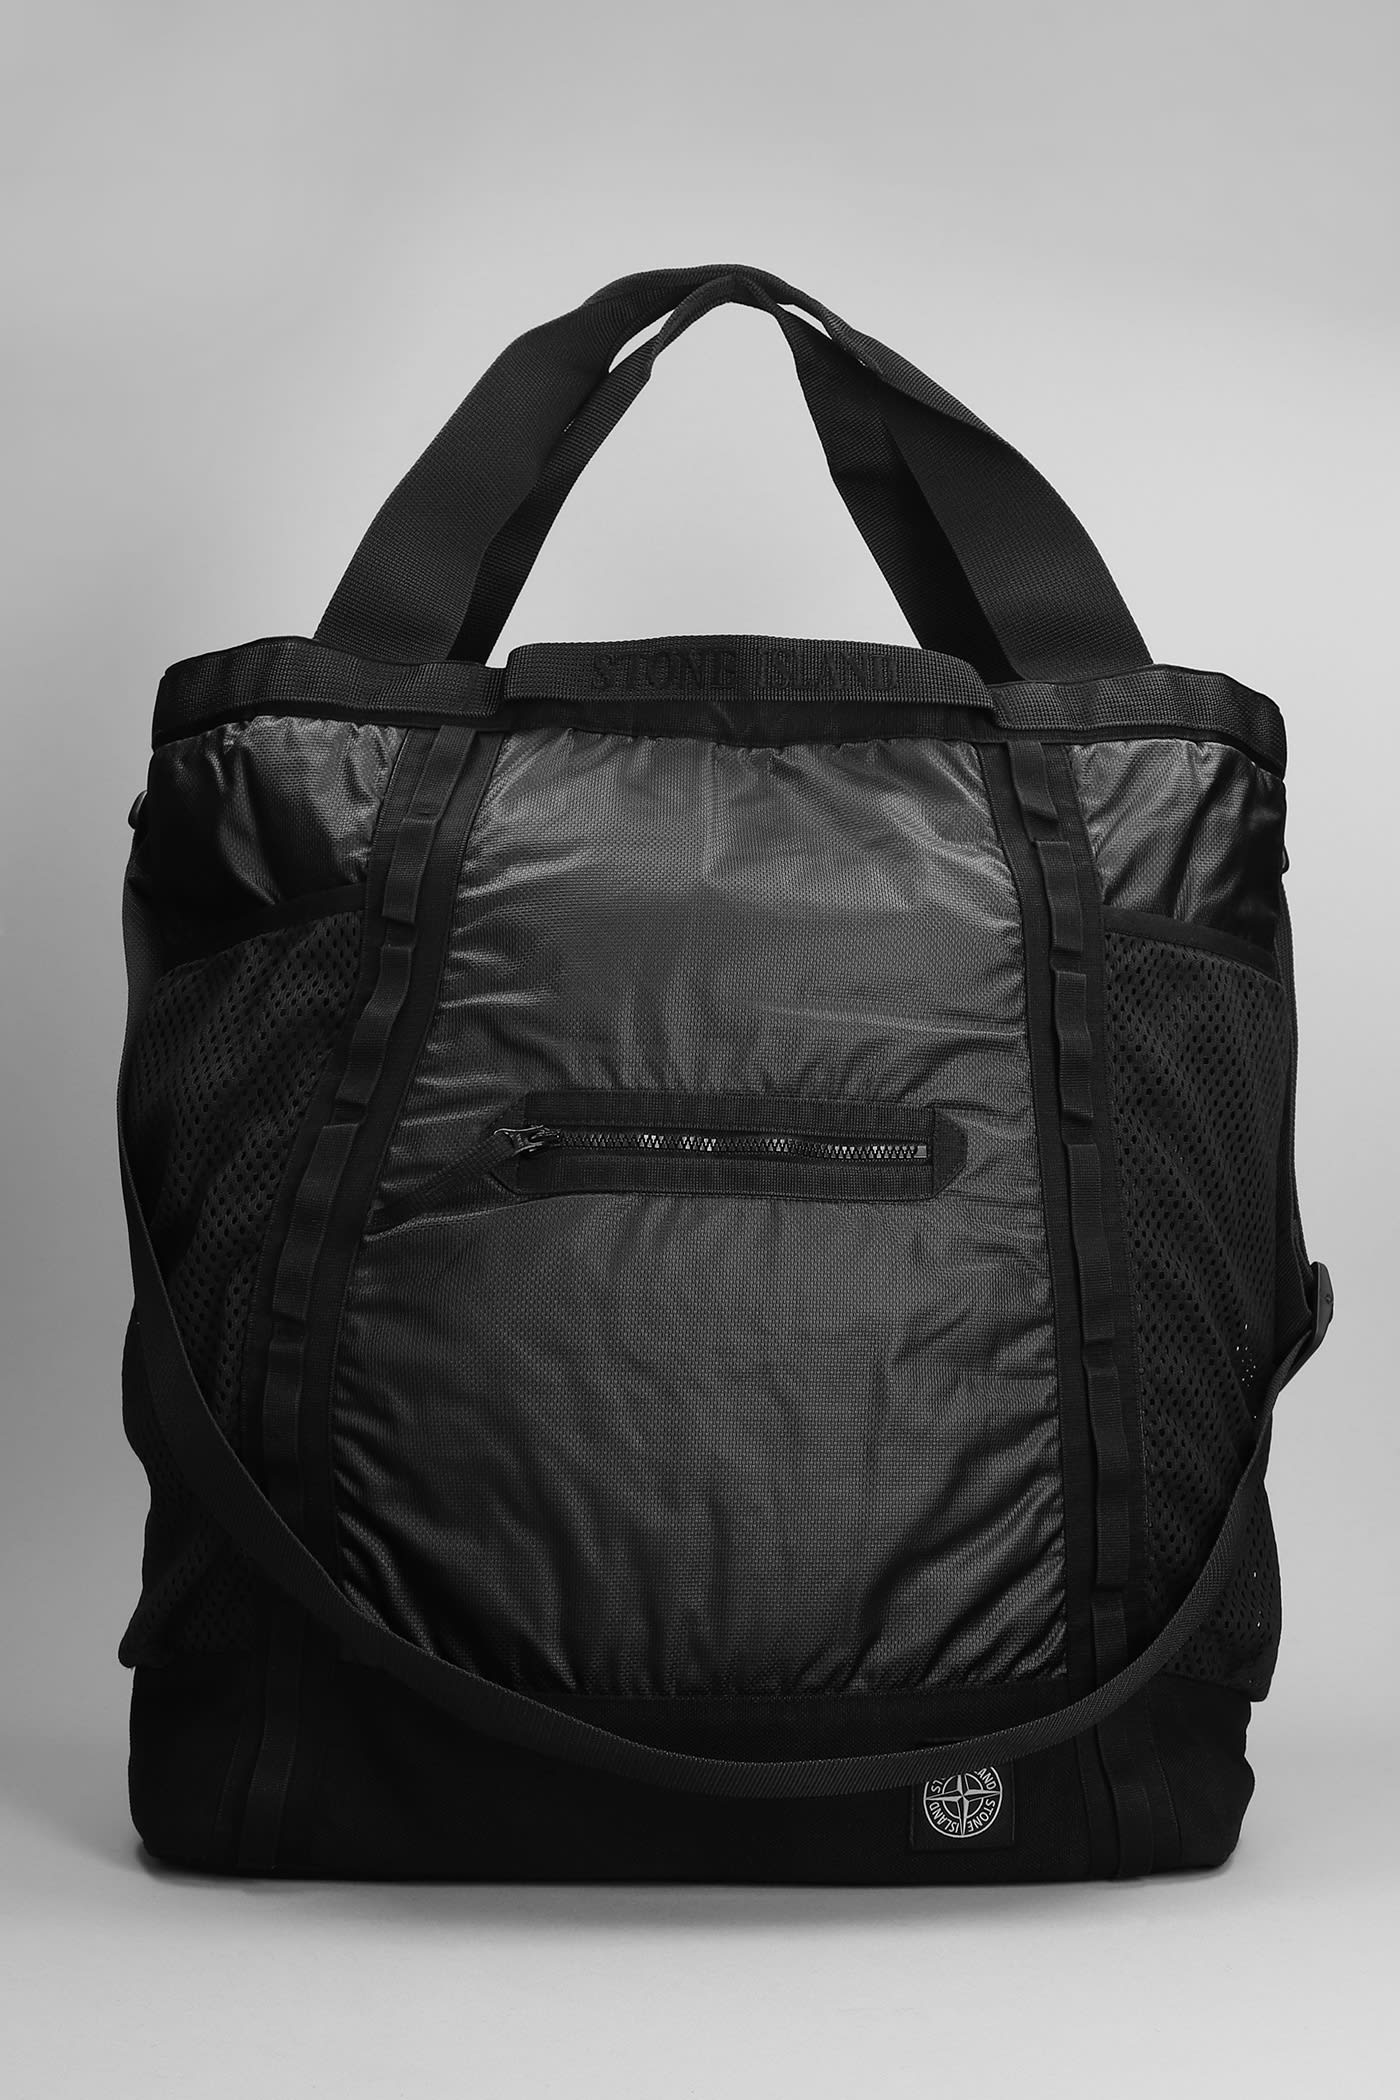 STONE ISLAND BACKPACK IN BLACK COTTON